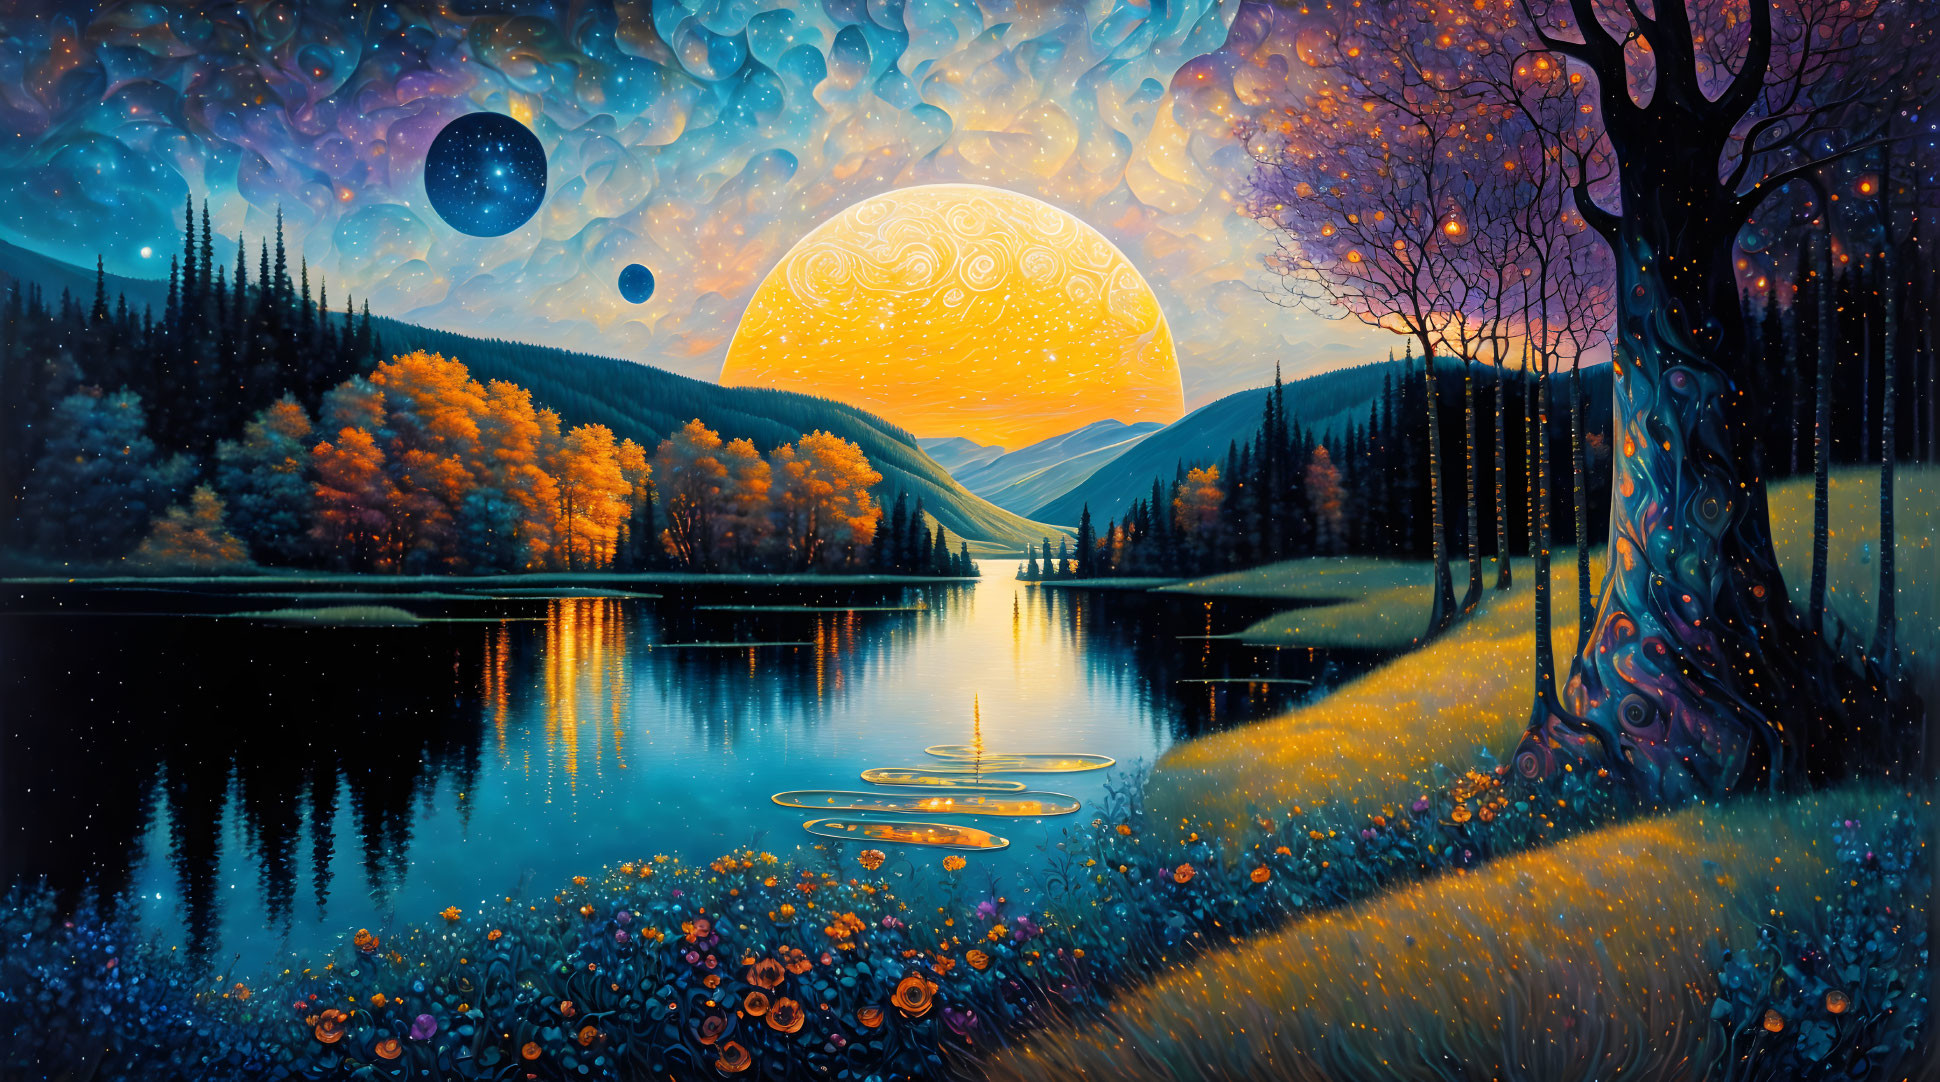 Autumn landscape painting with serene lake, starry sky, moon, and planets